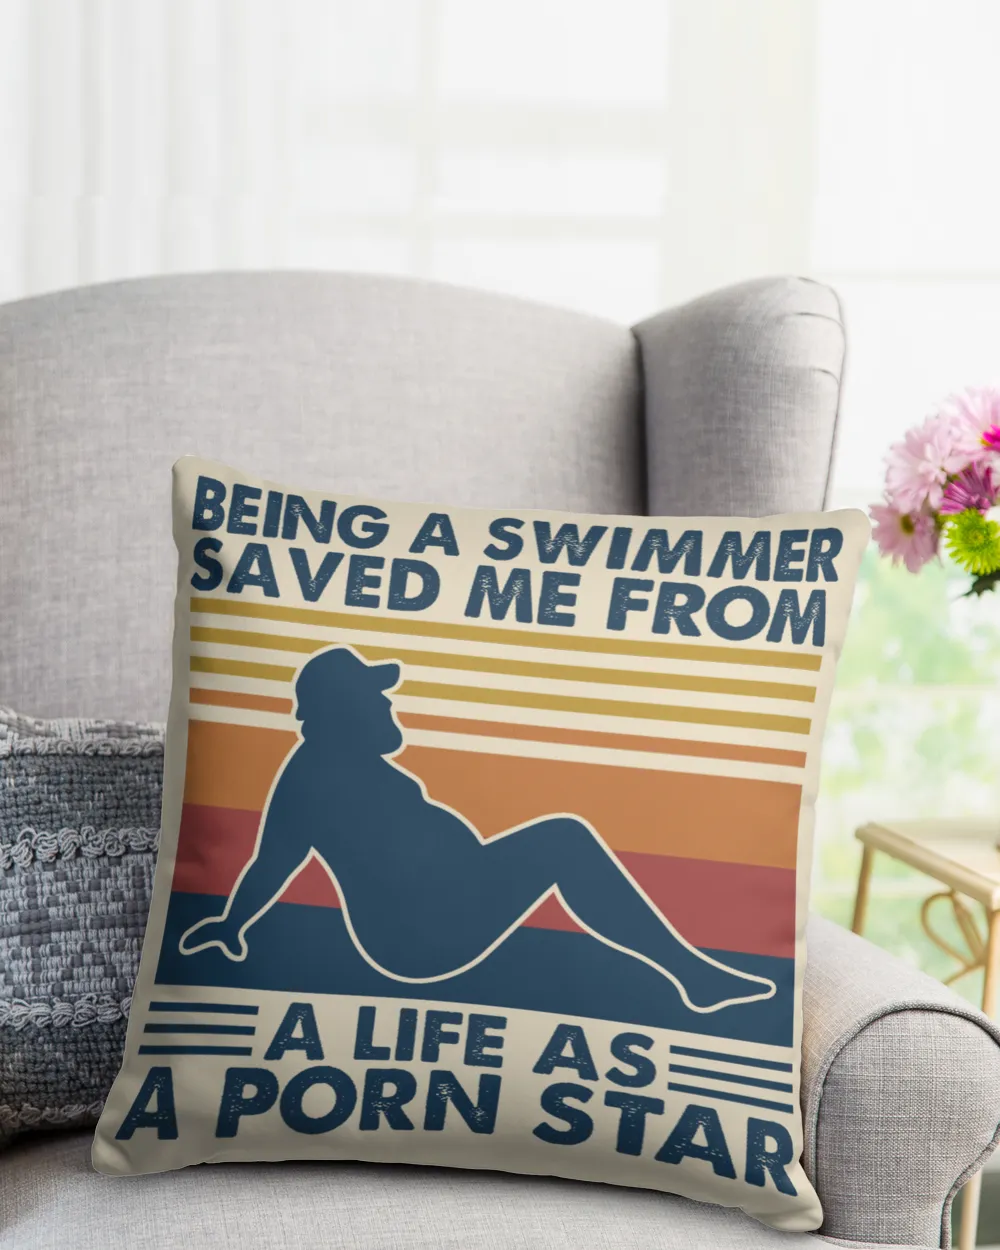 Being a swimmer saved me from